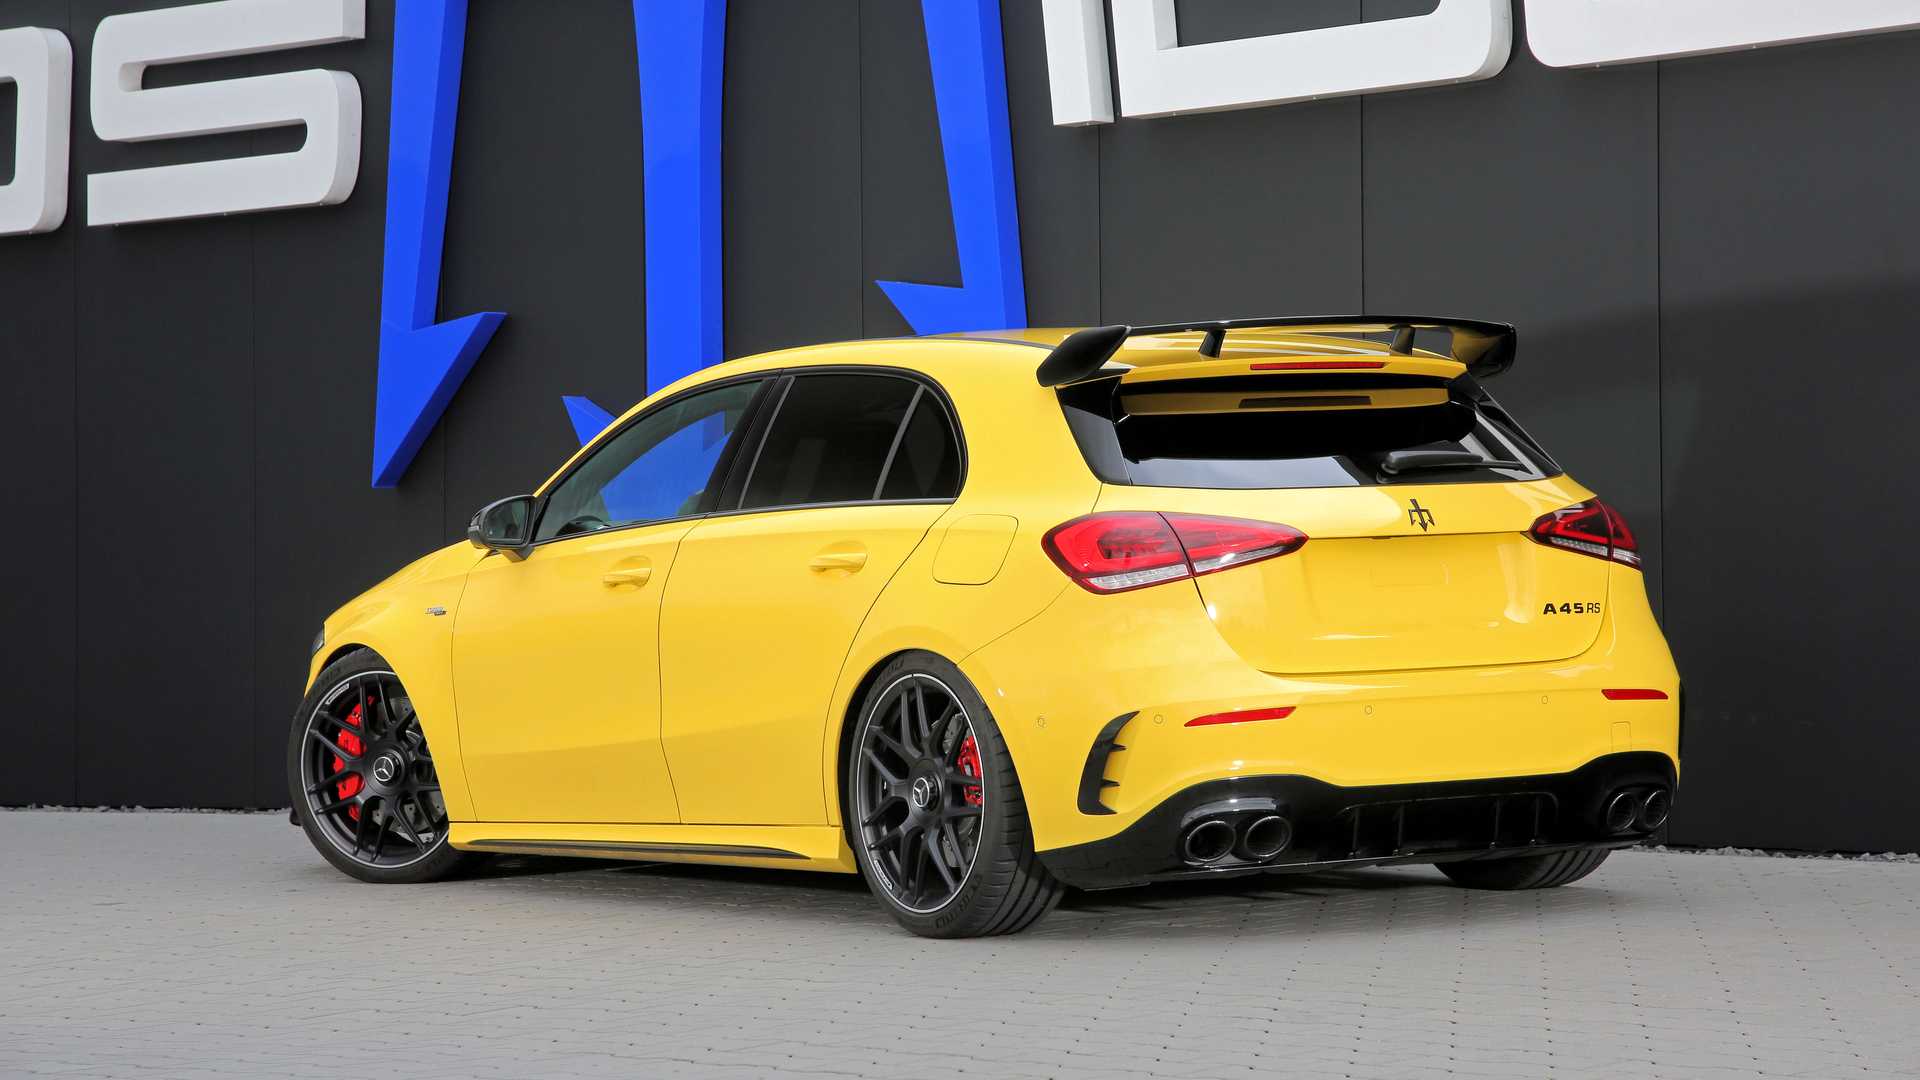 AMG A45 S by Posaidon Is Hotter than Hot at 525 HP